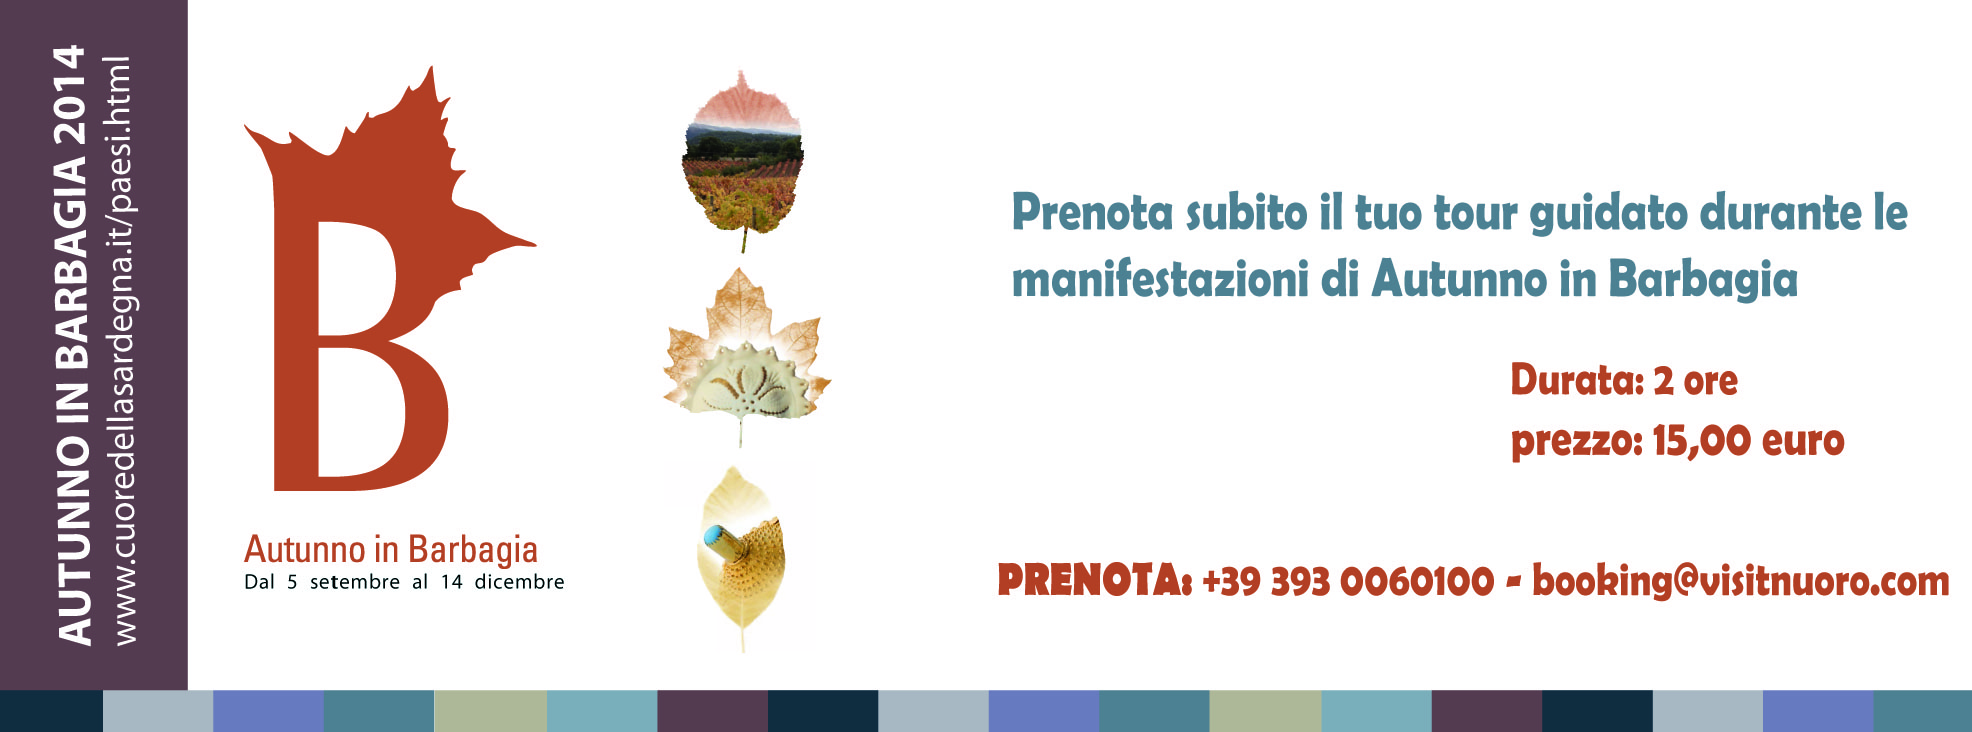 autunno in barbagia 2014 def